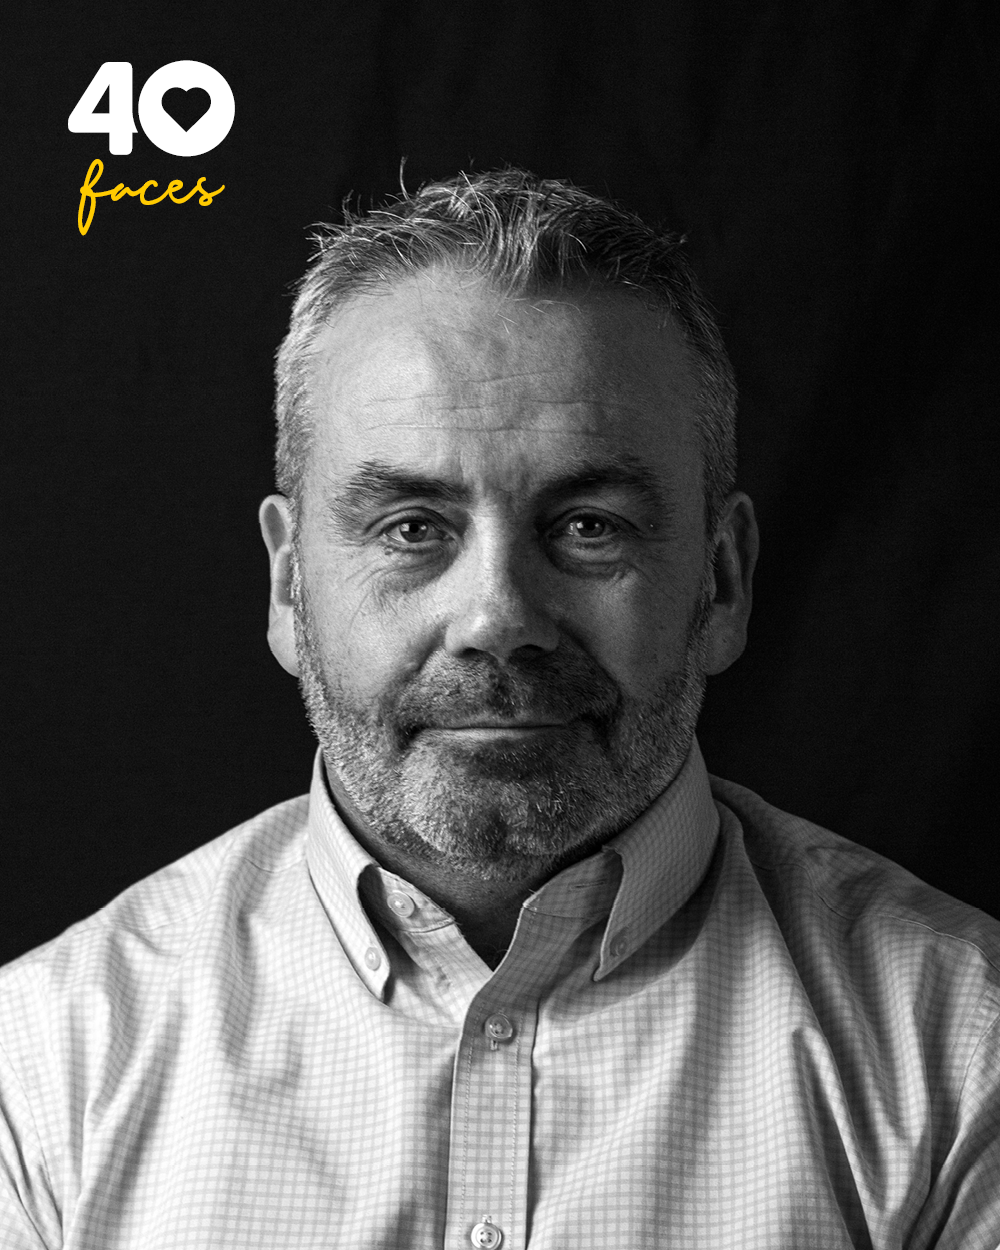 Black and white photograph of man with short hair and beard, wearing button-up shirt. On black background with logo in top left corner in white and yellow with text "40 Faces"